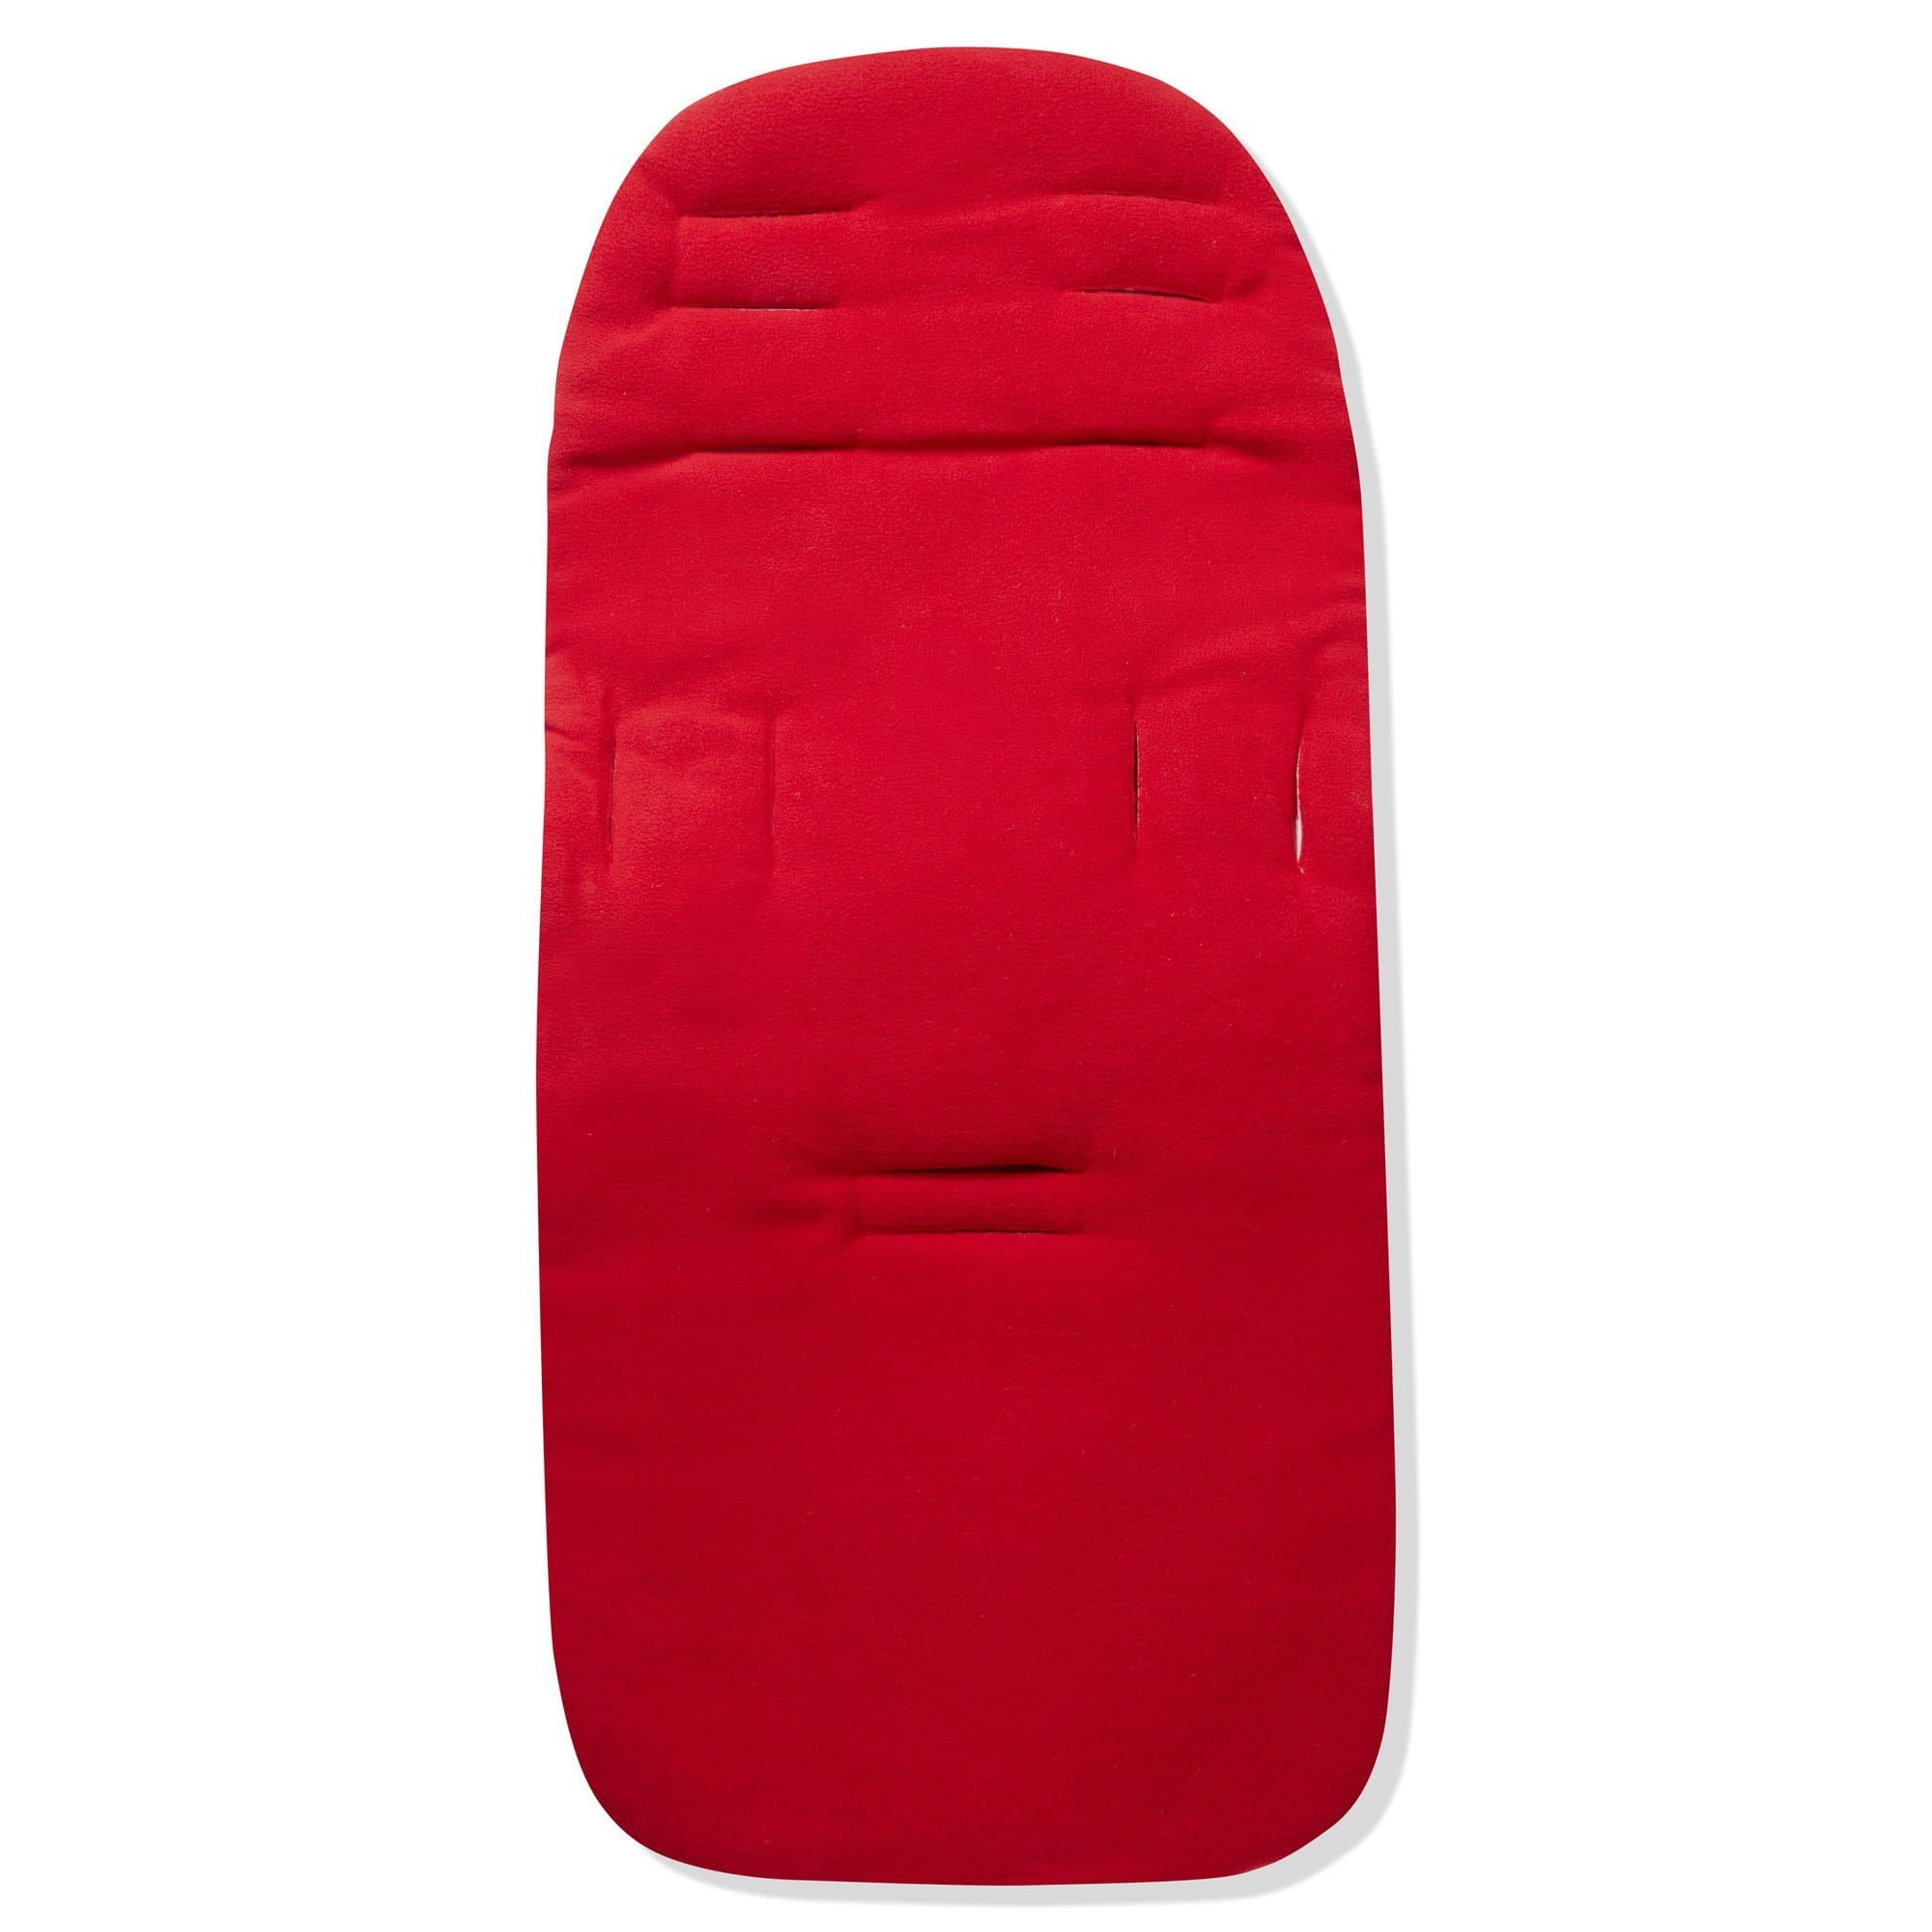 Fleece Footmuff / Cosy Toes Compatible with Kids Kargo - For Your Little One